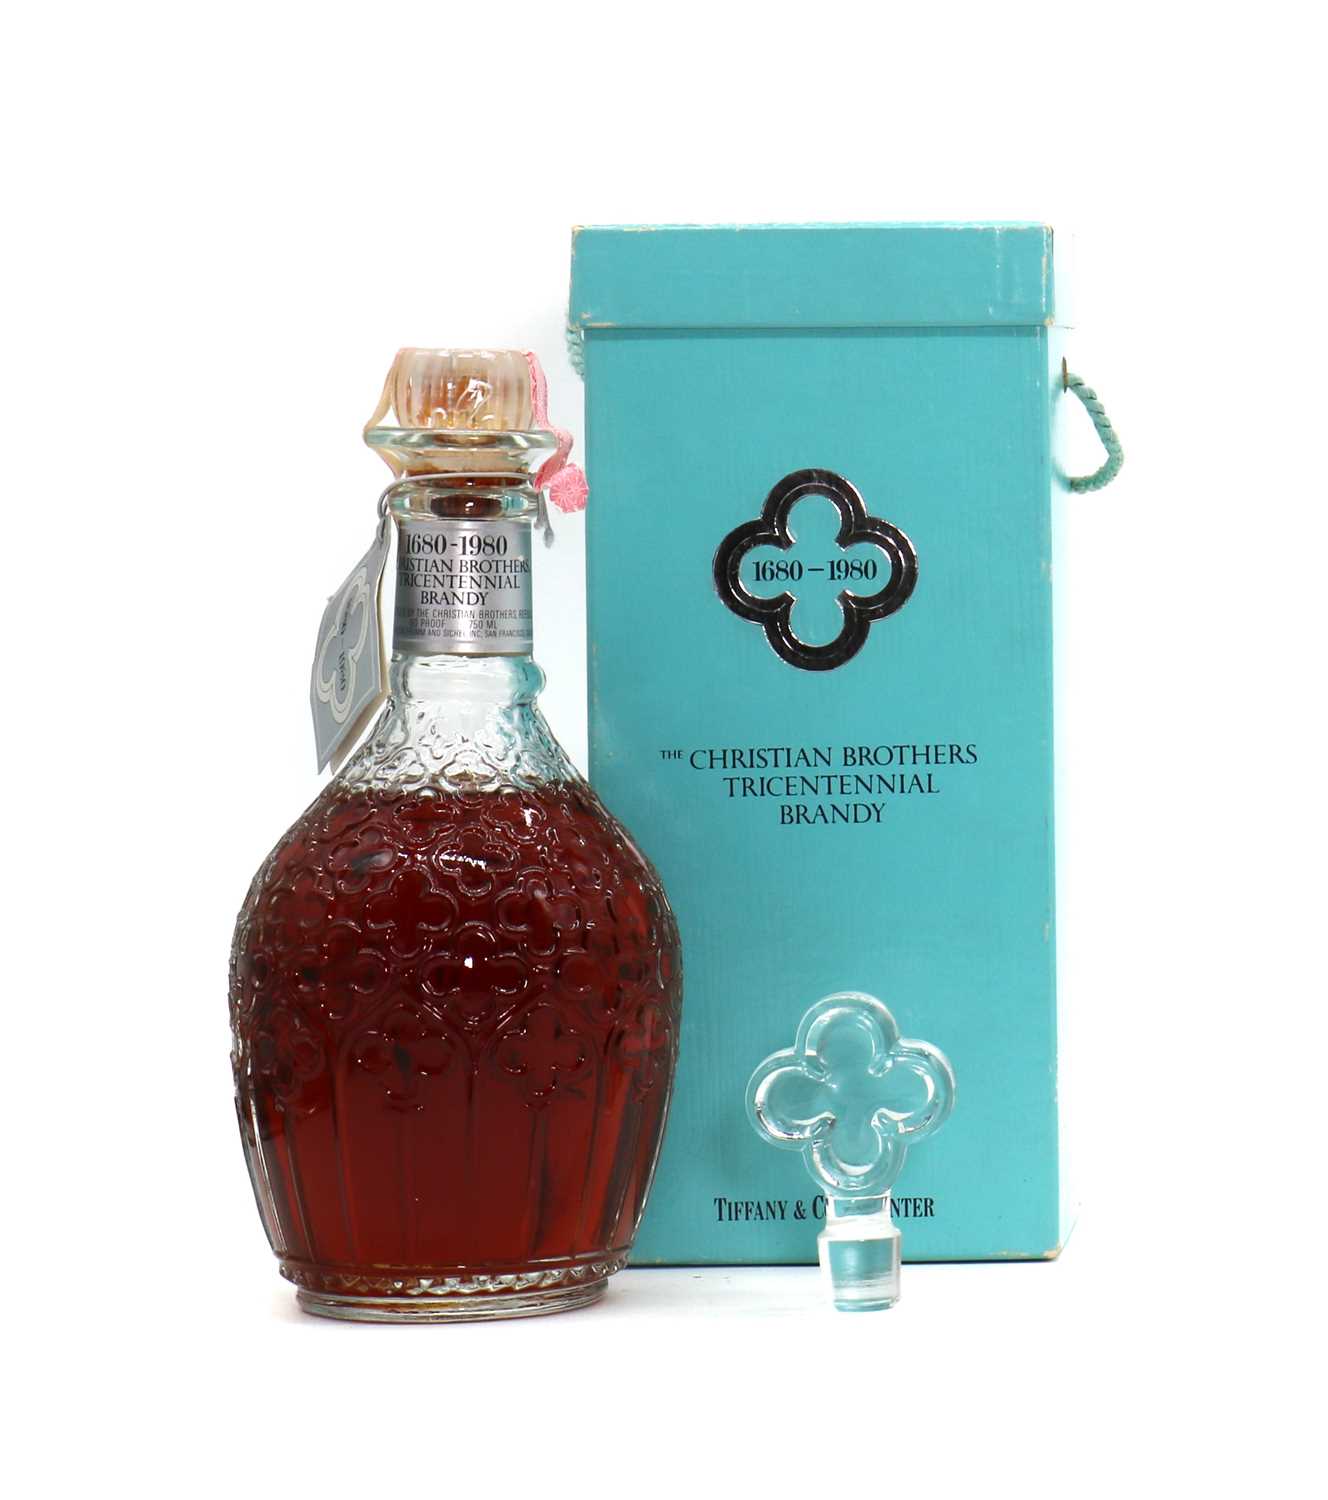 Christian Brothers Tricentennial brandy in Tiffany & Co Decanter (1, boxed)